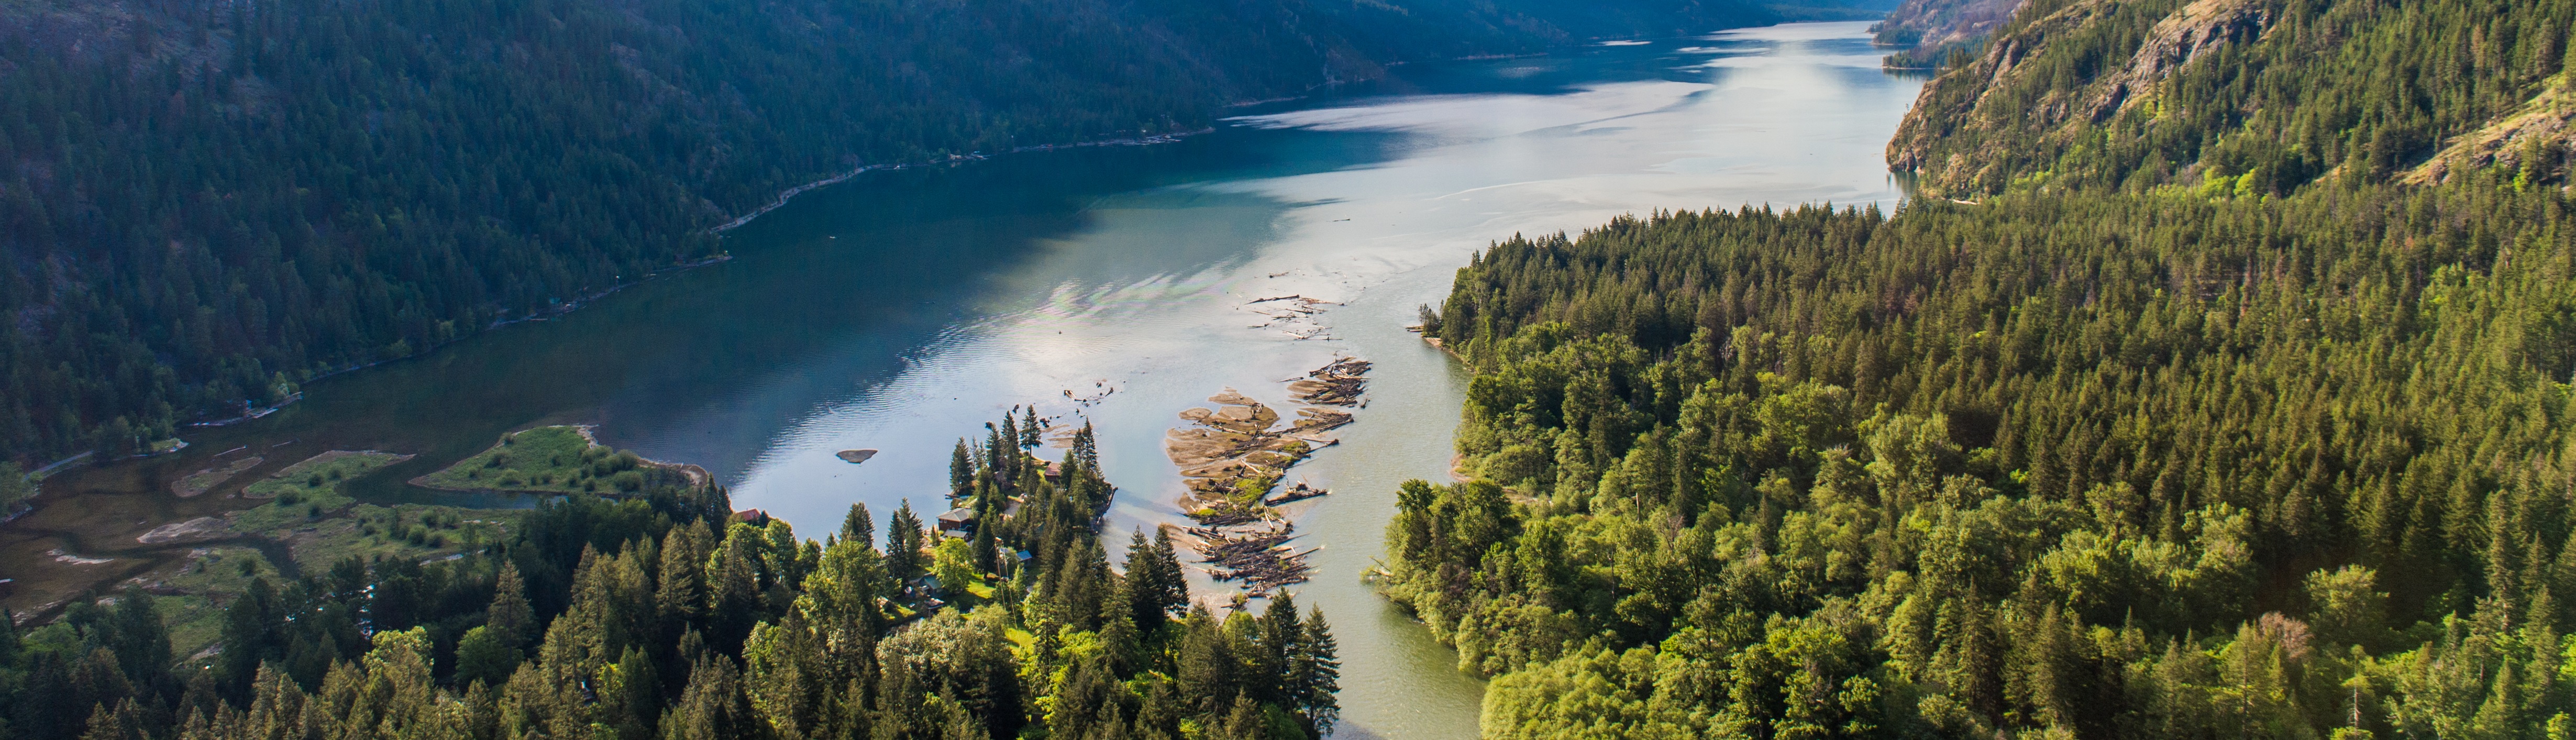 Photo of the mouth of the Stehekin River